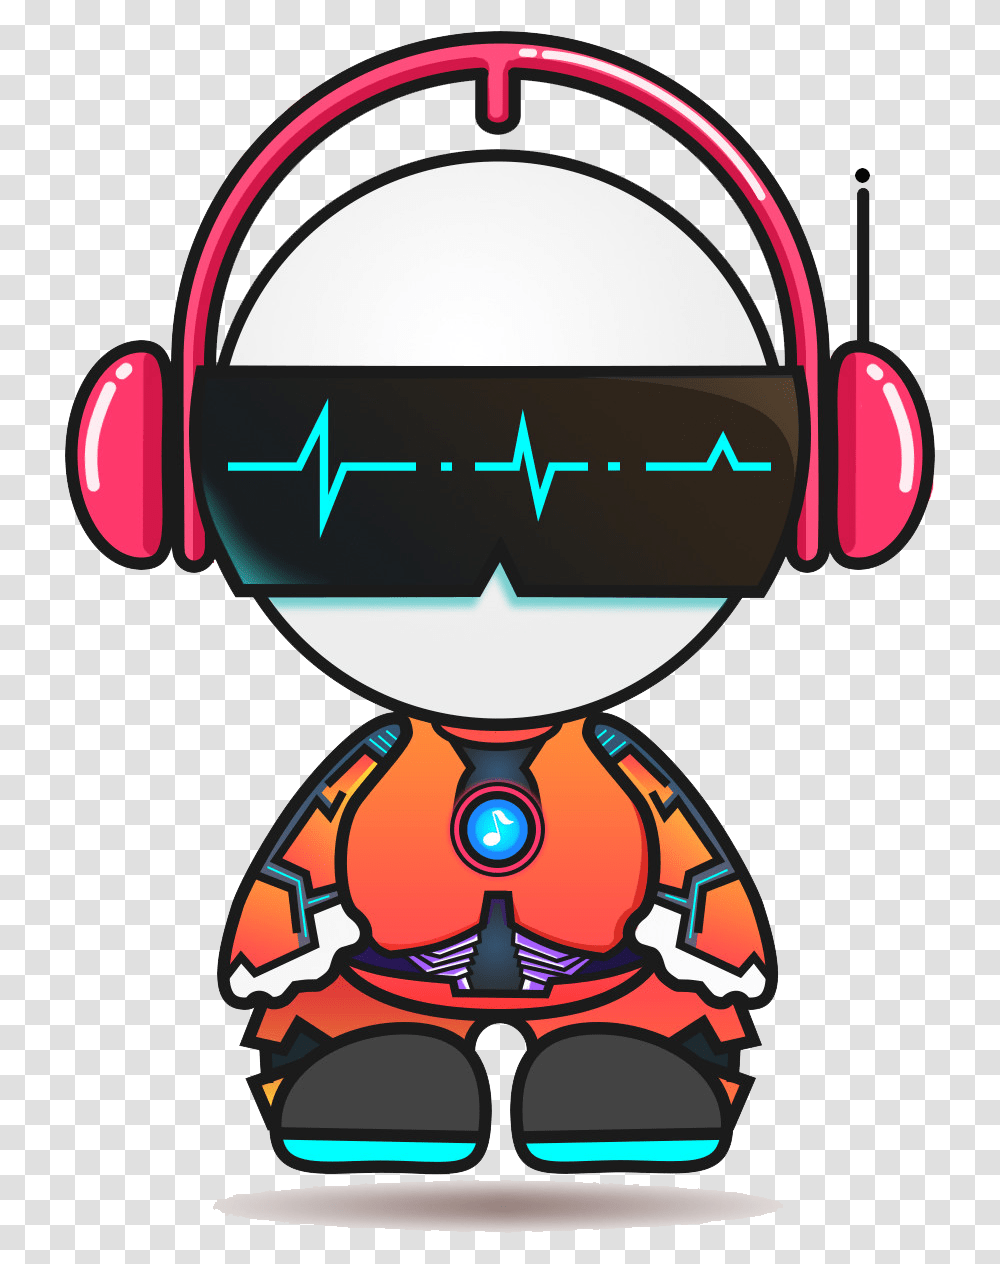 Wearing Sunglasses People Universe Headphones To Listening Cartoon People With Headphones, Robot, Electronics, Dynamite, Bomb Transparent Png